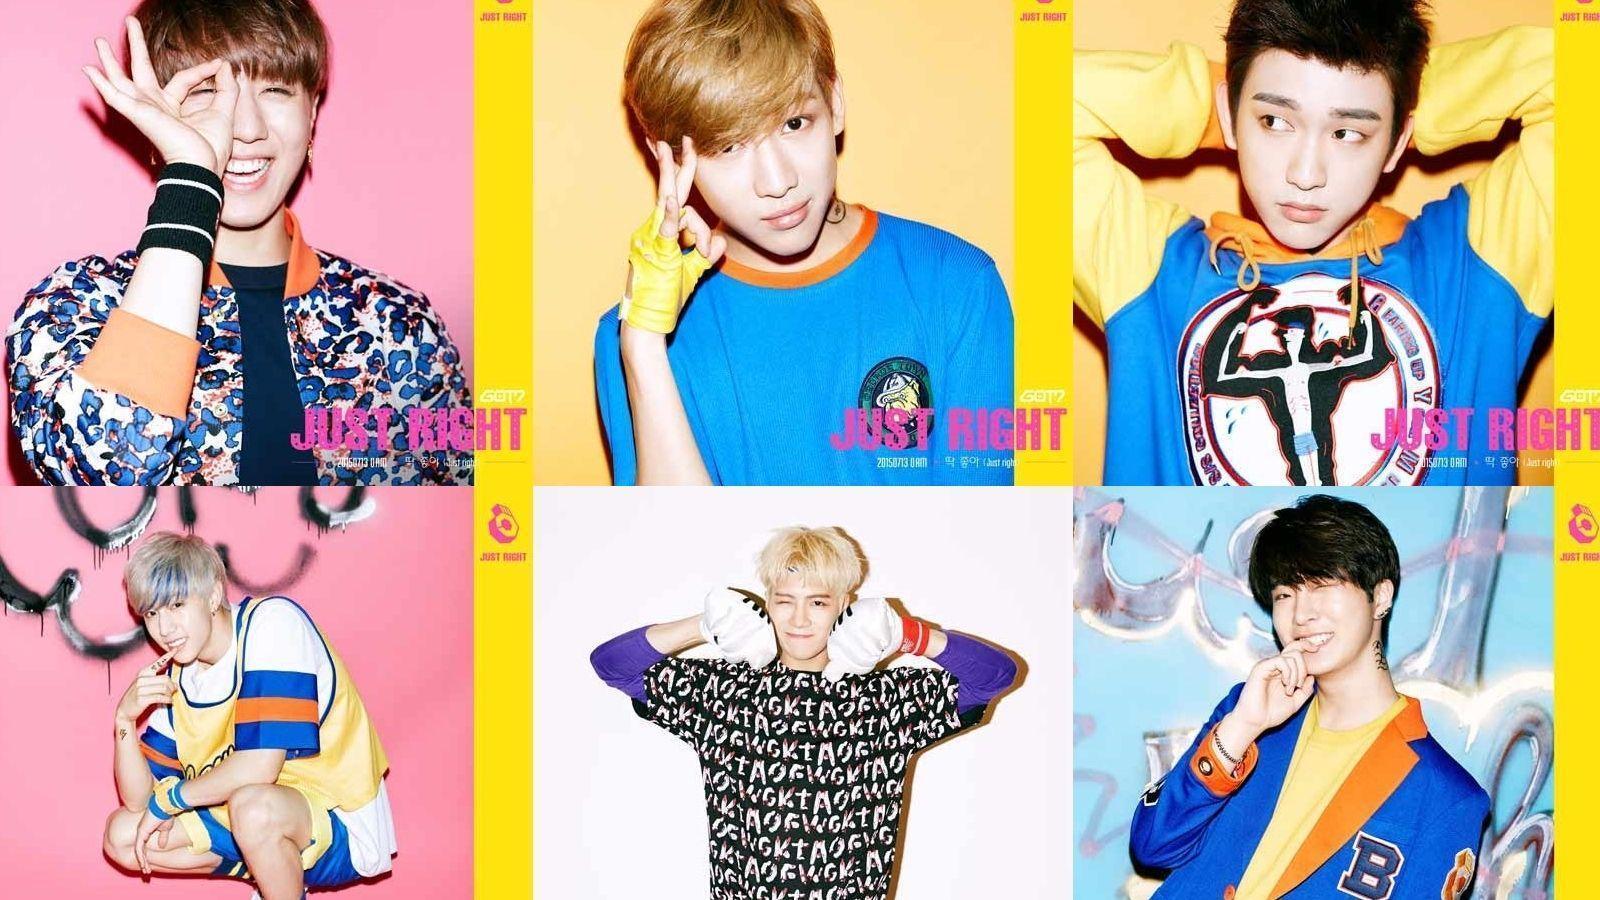 Just Right Poster Wallpaper (1600x900)